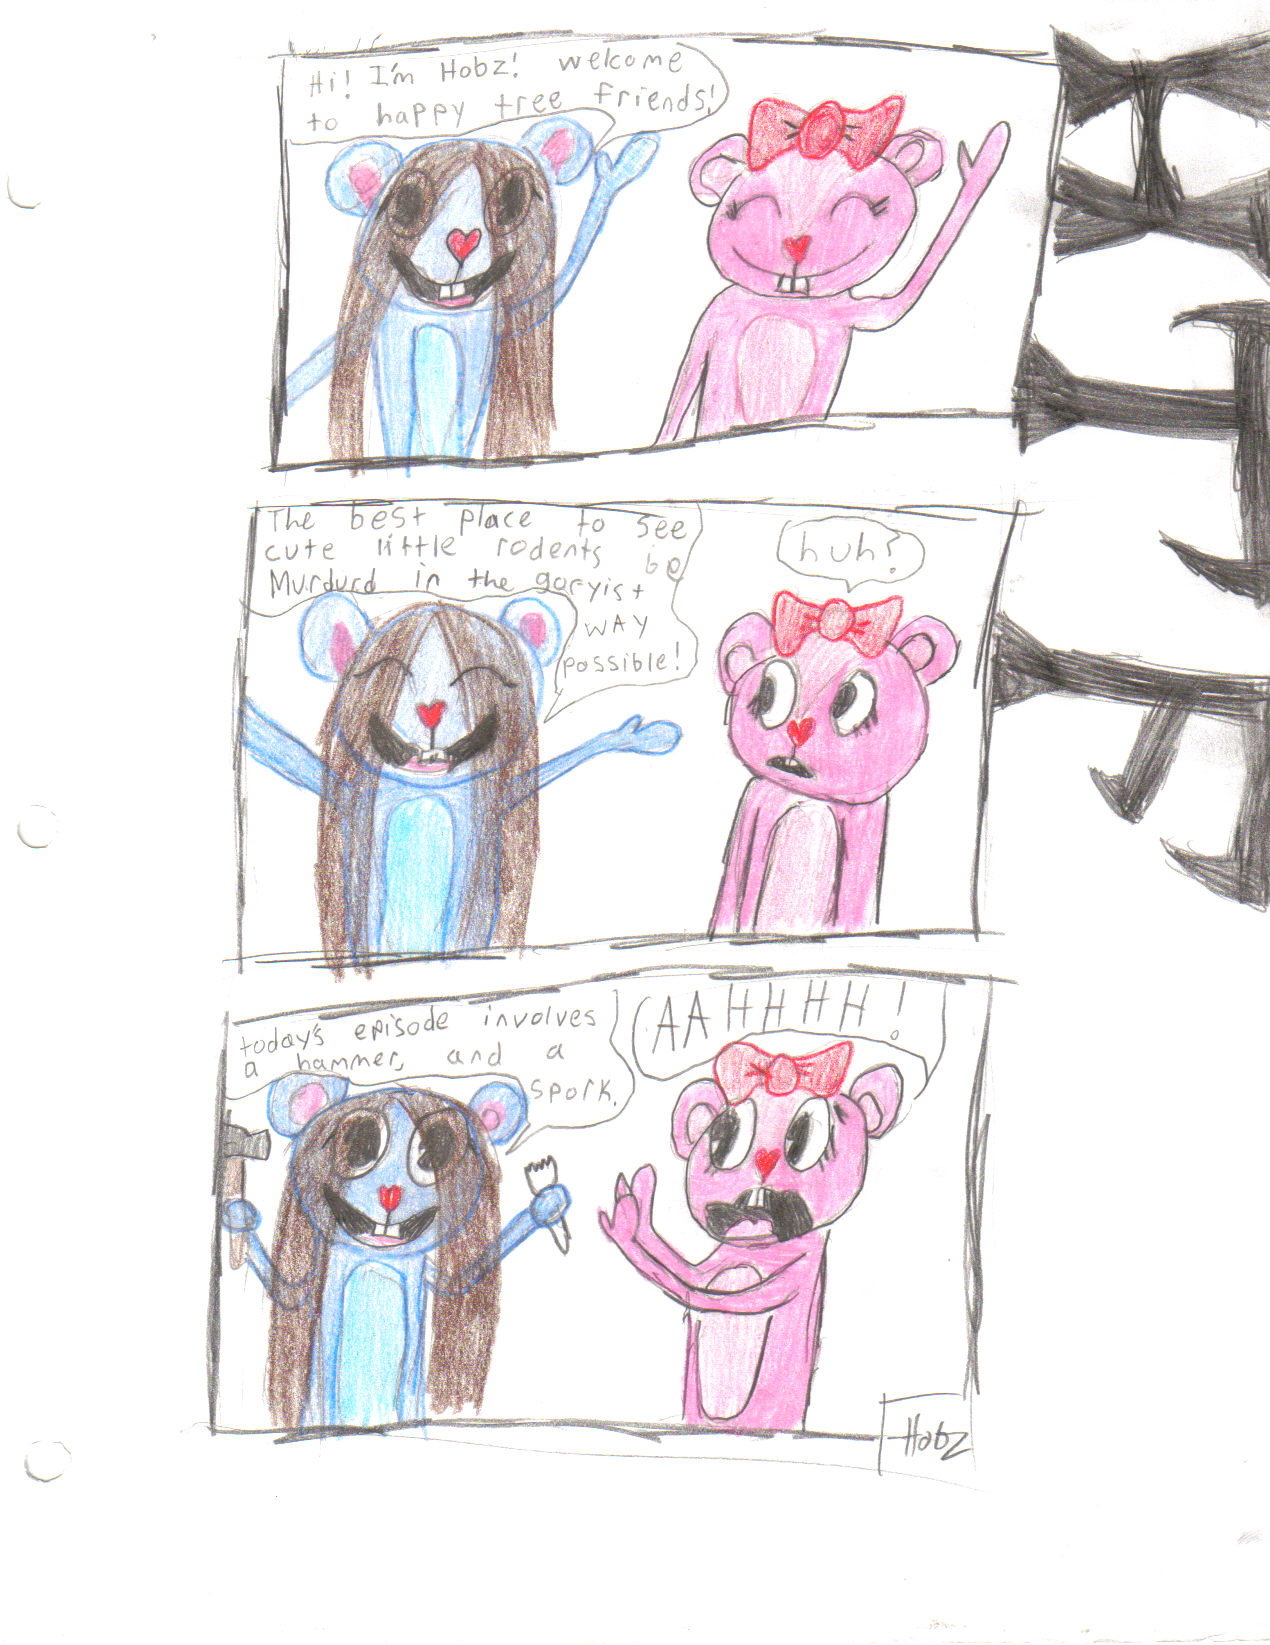 Happy tree friends comic! by Hobz_the_destroyer